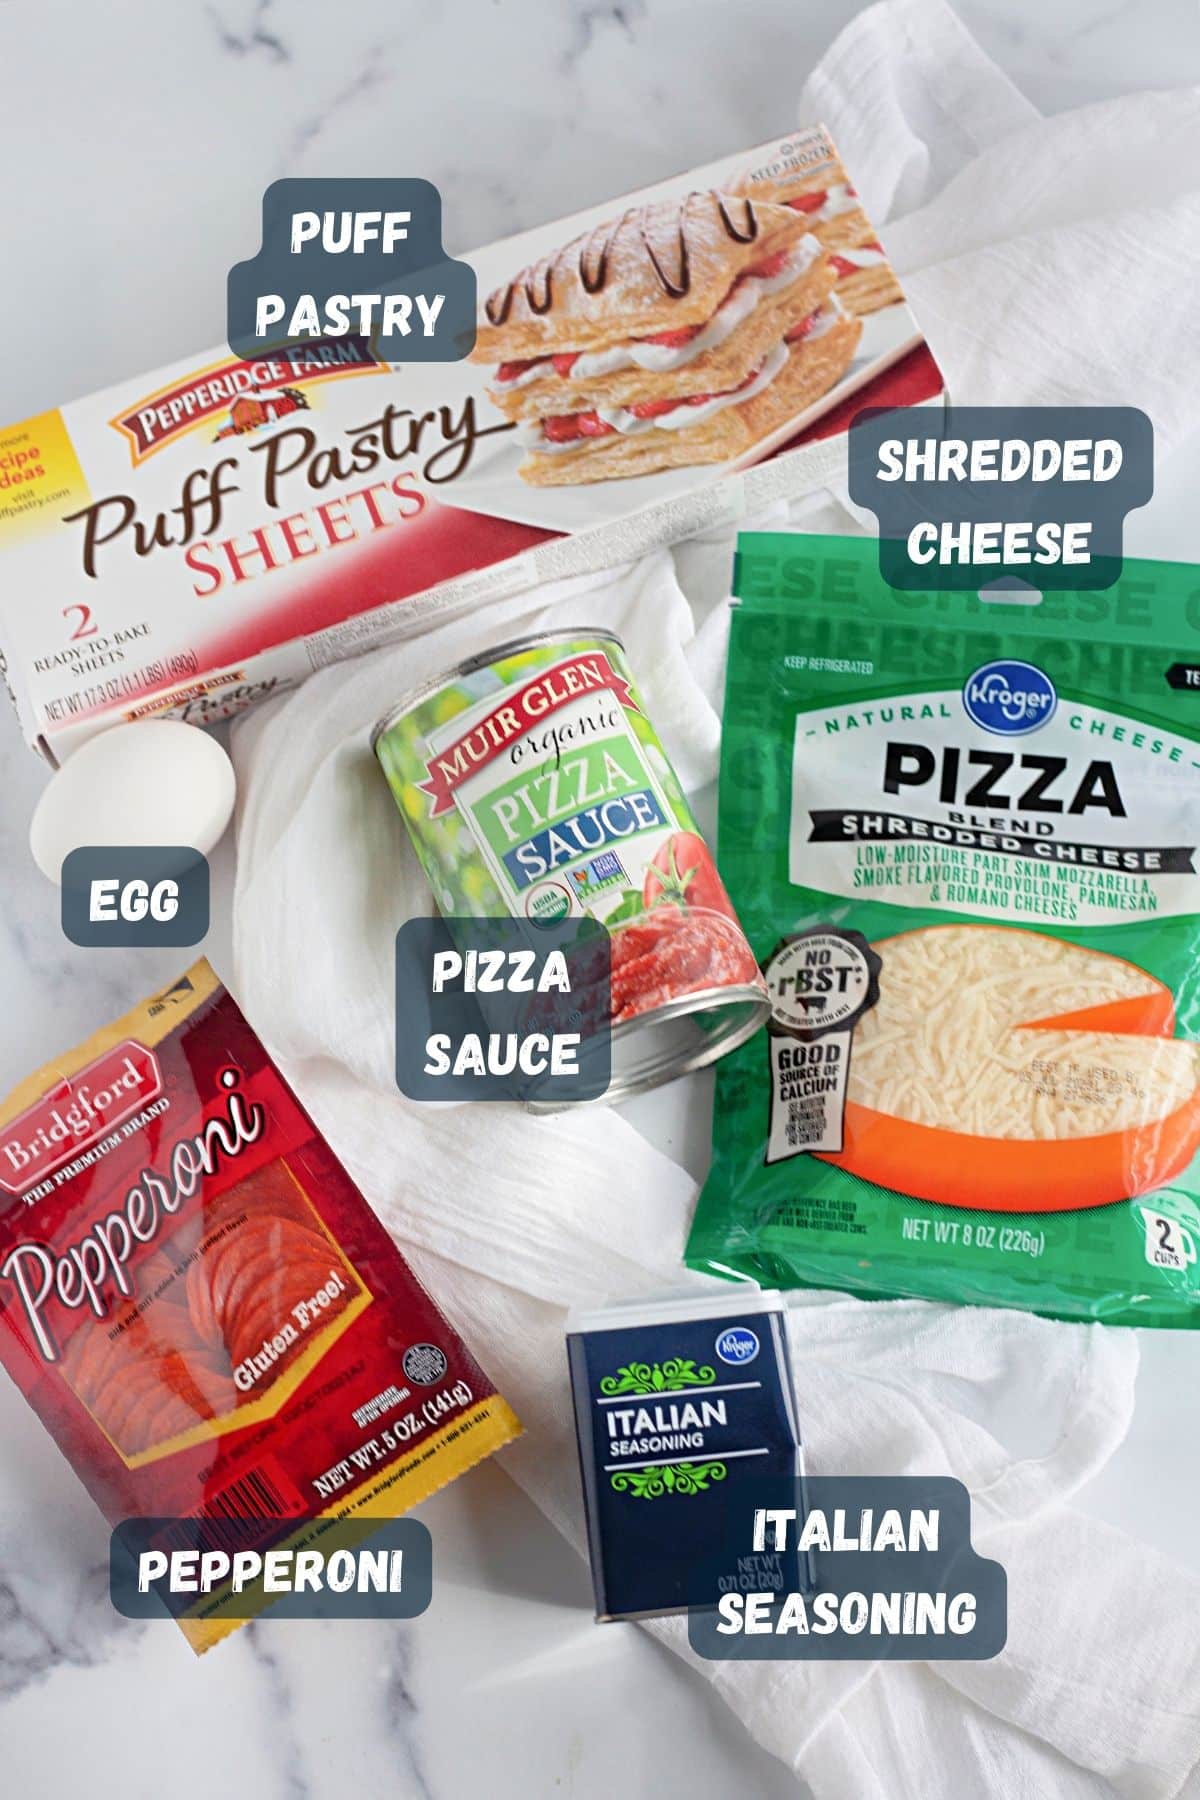 Ingredients shown to make pizza pockets. 